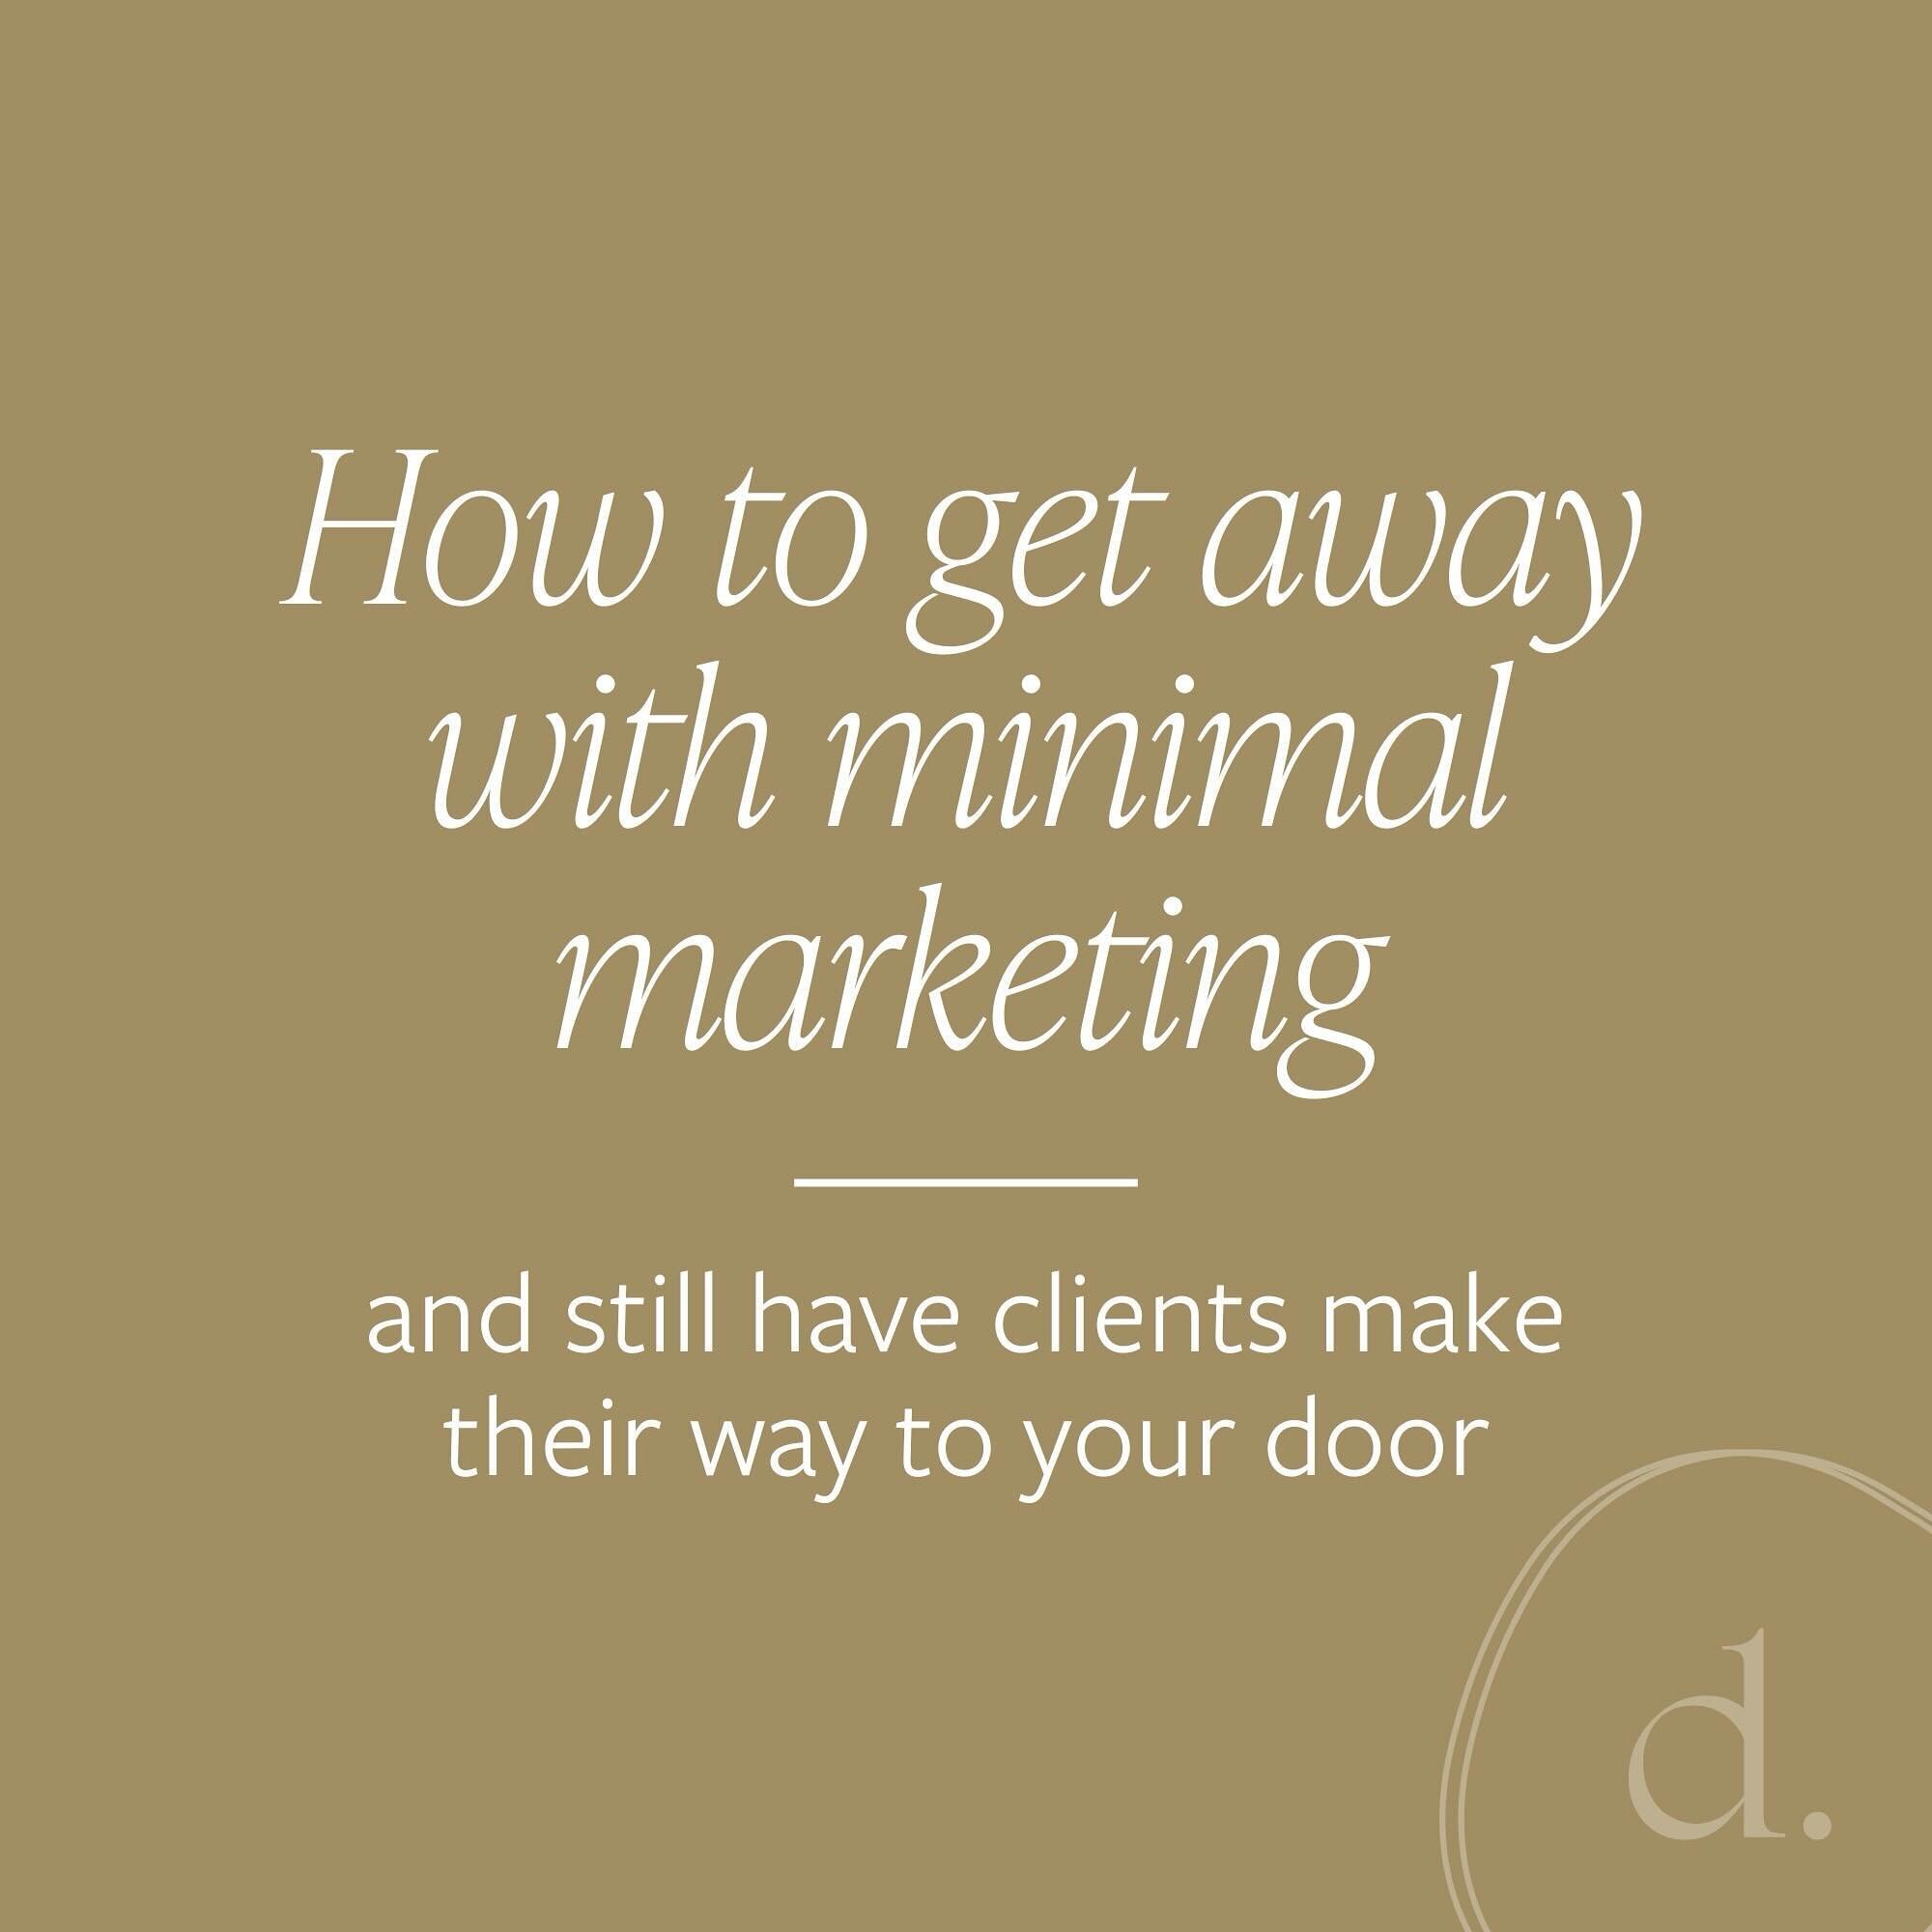 When you boil it down, today&rsquo;s workshop is about how to get away with minimal marketing &mdash; and still have your ideal clients make their way to your door. 

It&rsquo;s about how to have the marketing that you do, feel like a true expression